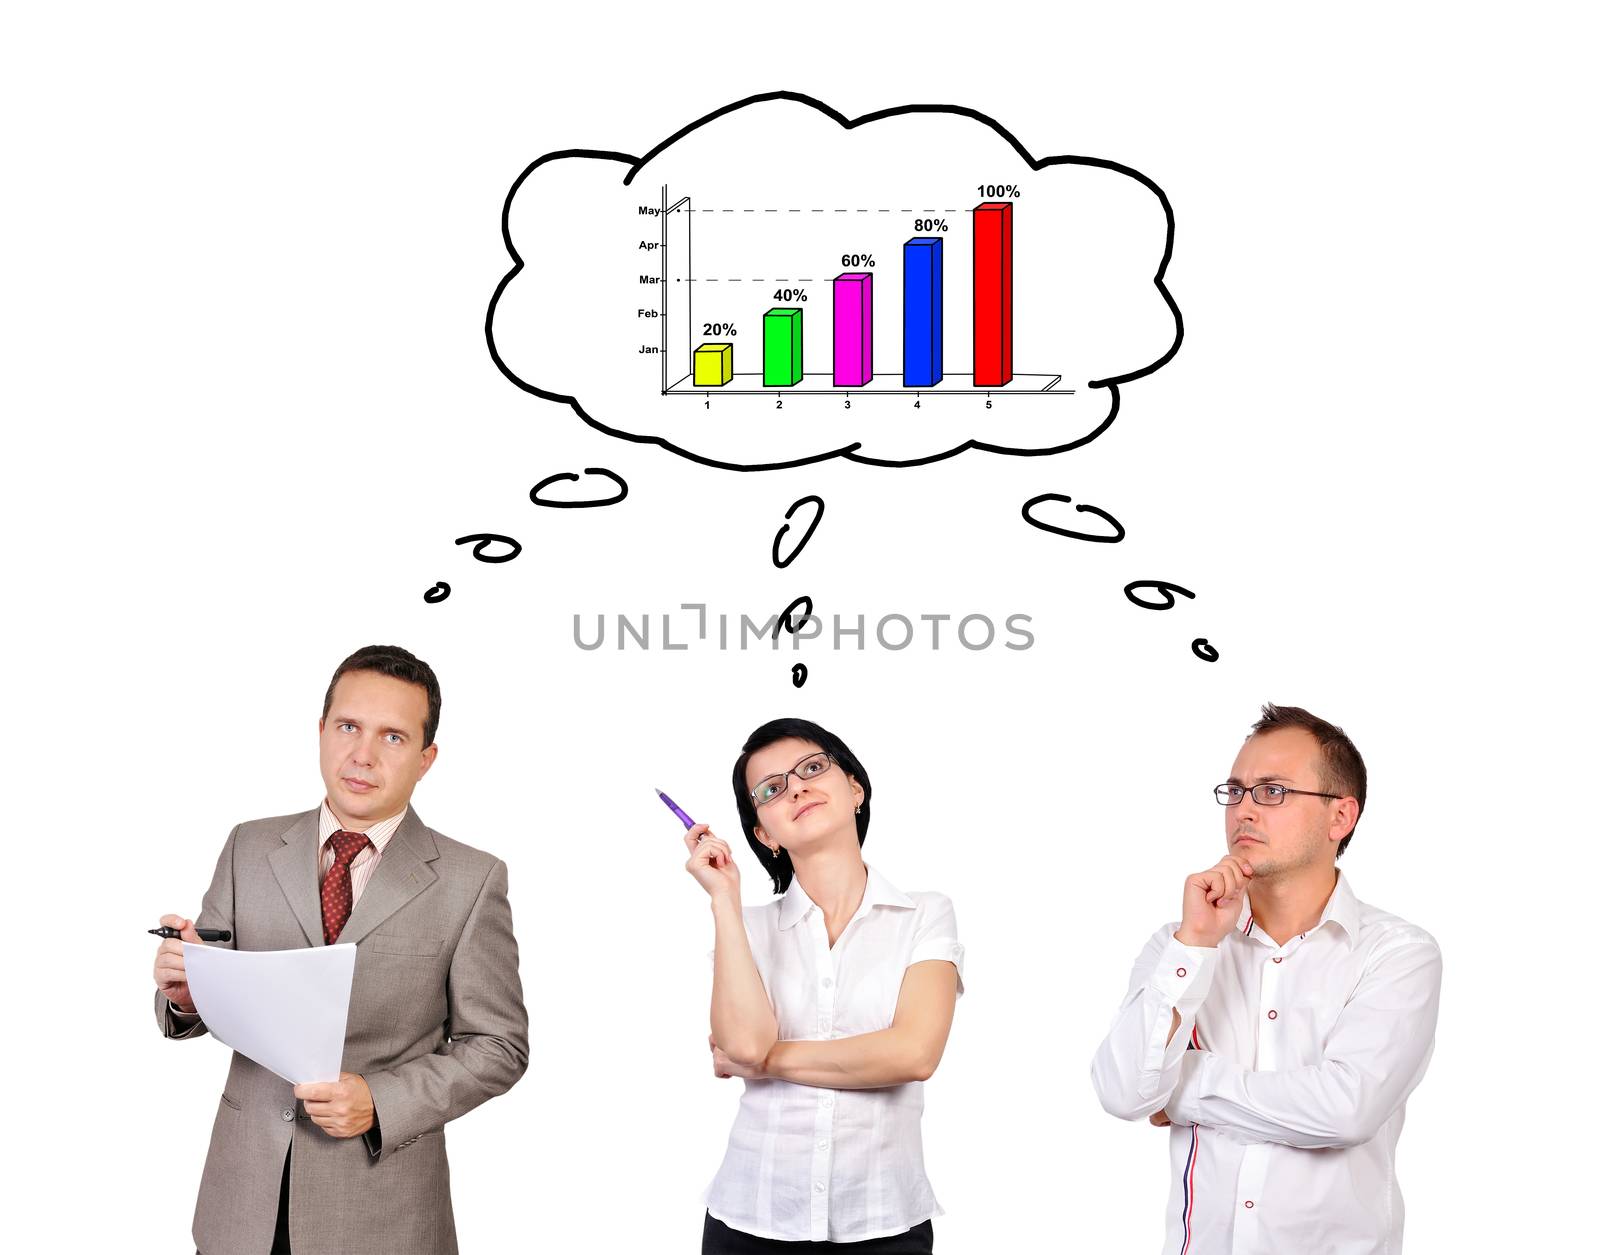 businesspeople dreaming on white background